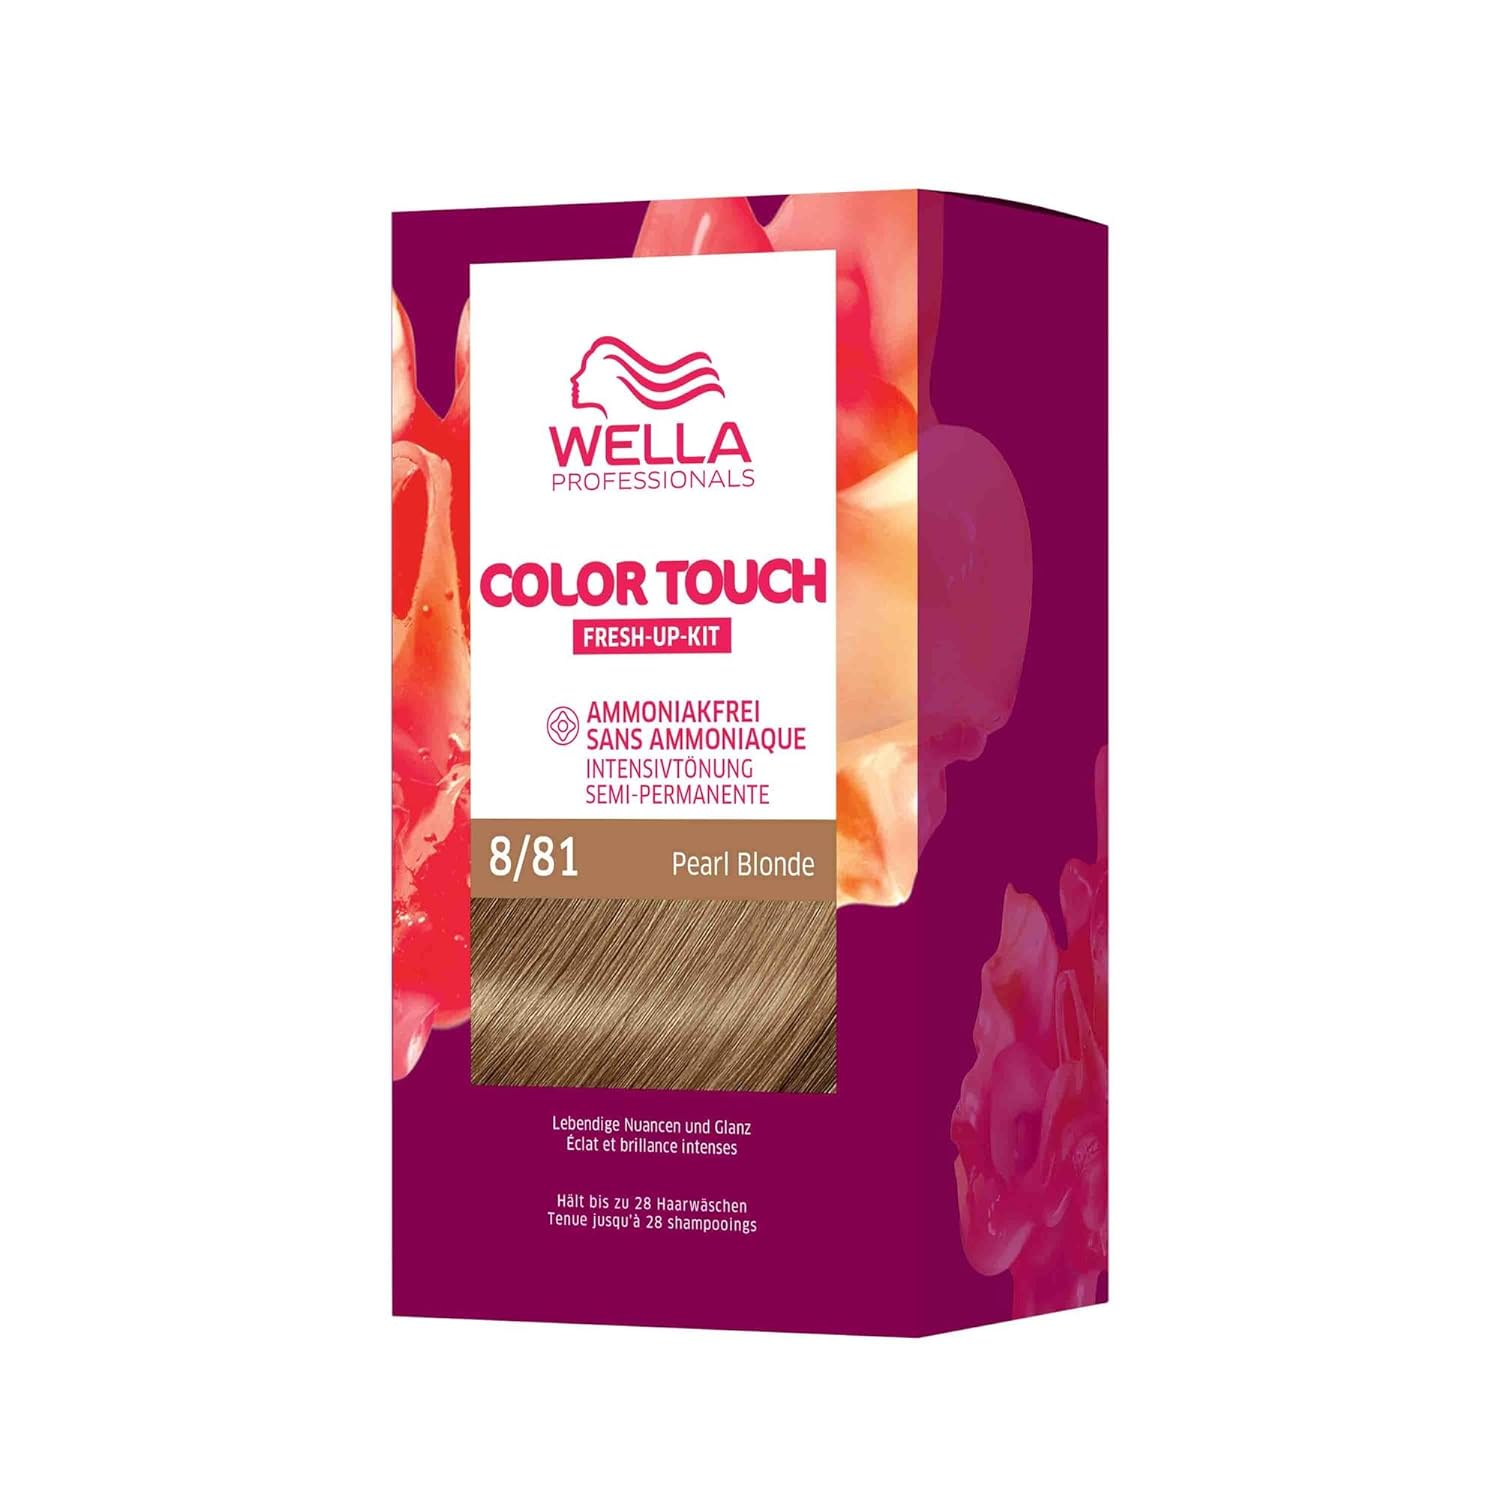 Wella Professionals Color Touch Semi -Permanent Hair Color Without Ammonia - Hair Dye for Color Restoration and Gray Hair Coverage - Root Kit Including Hair Mask